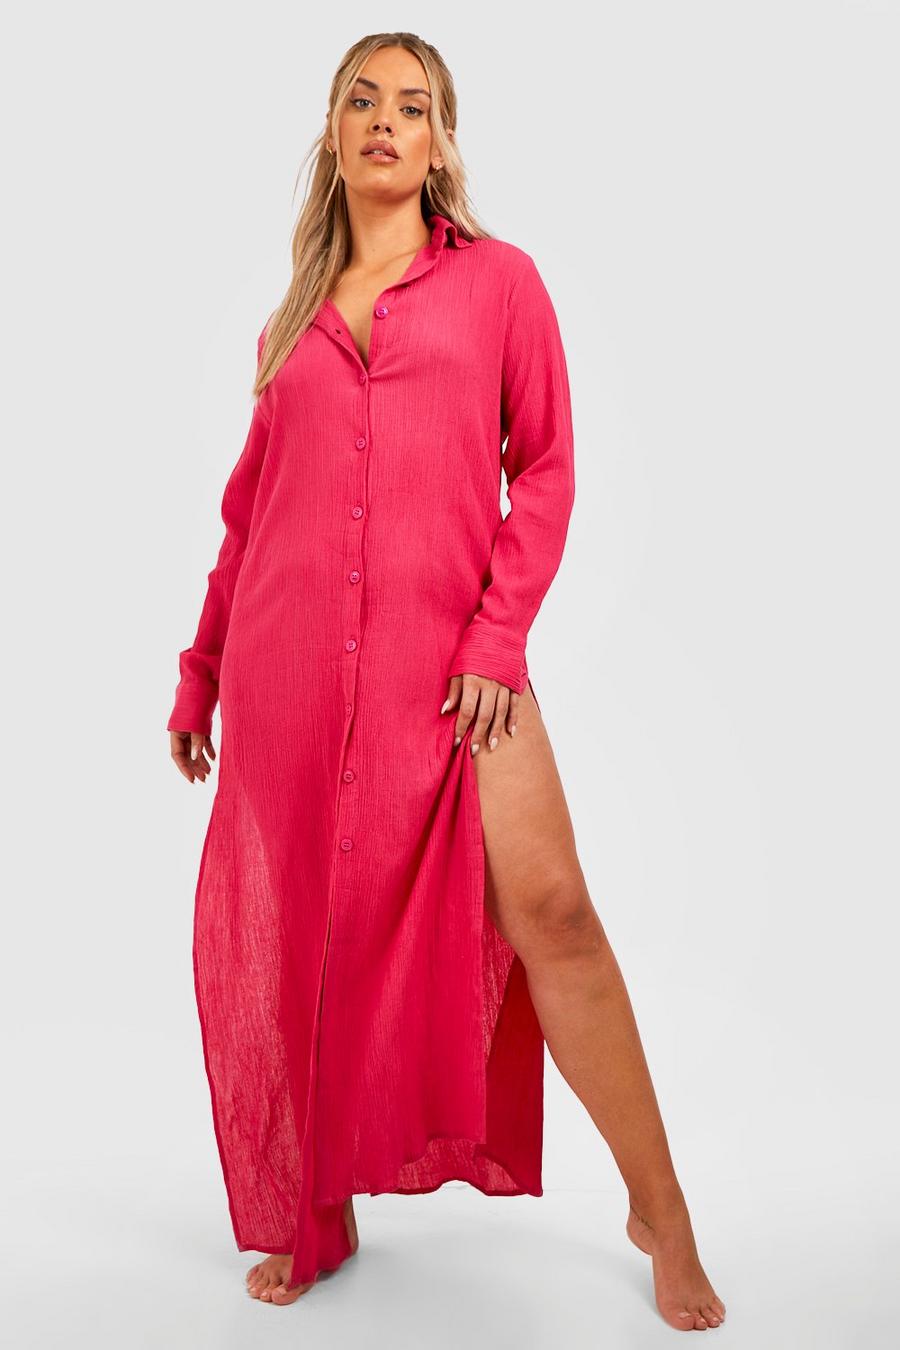 Swim Cover ups Womens Plus Size Bathing Suit Cover Ups Sexy Strap